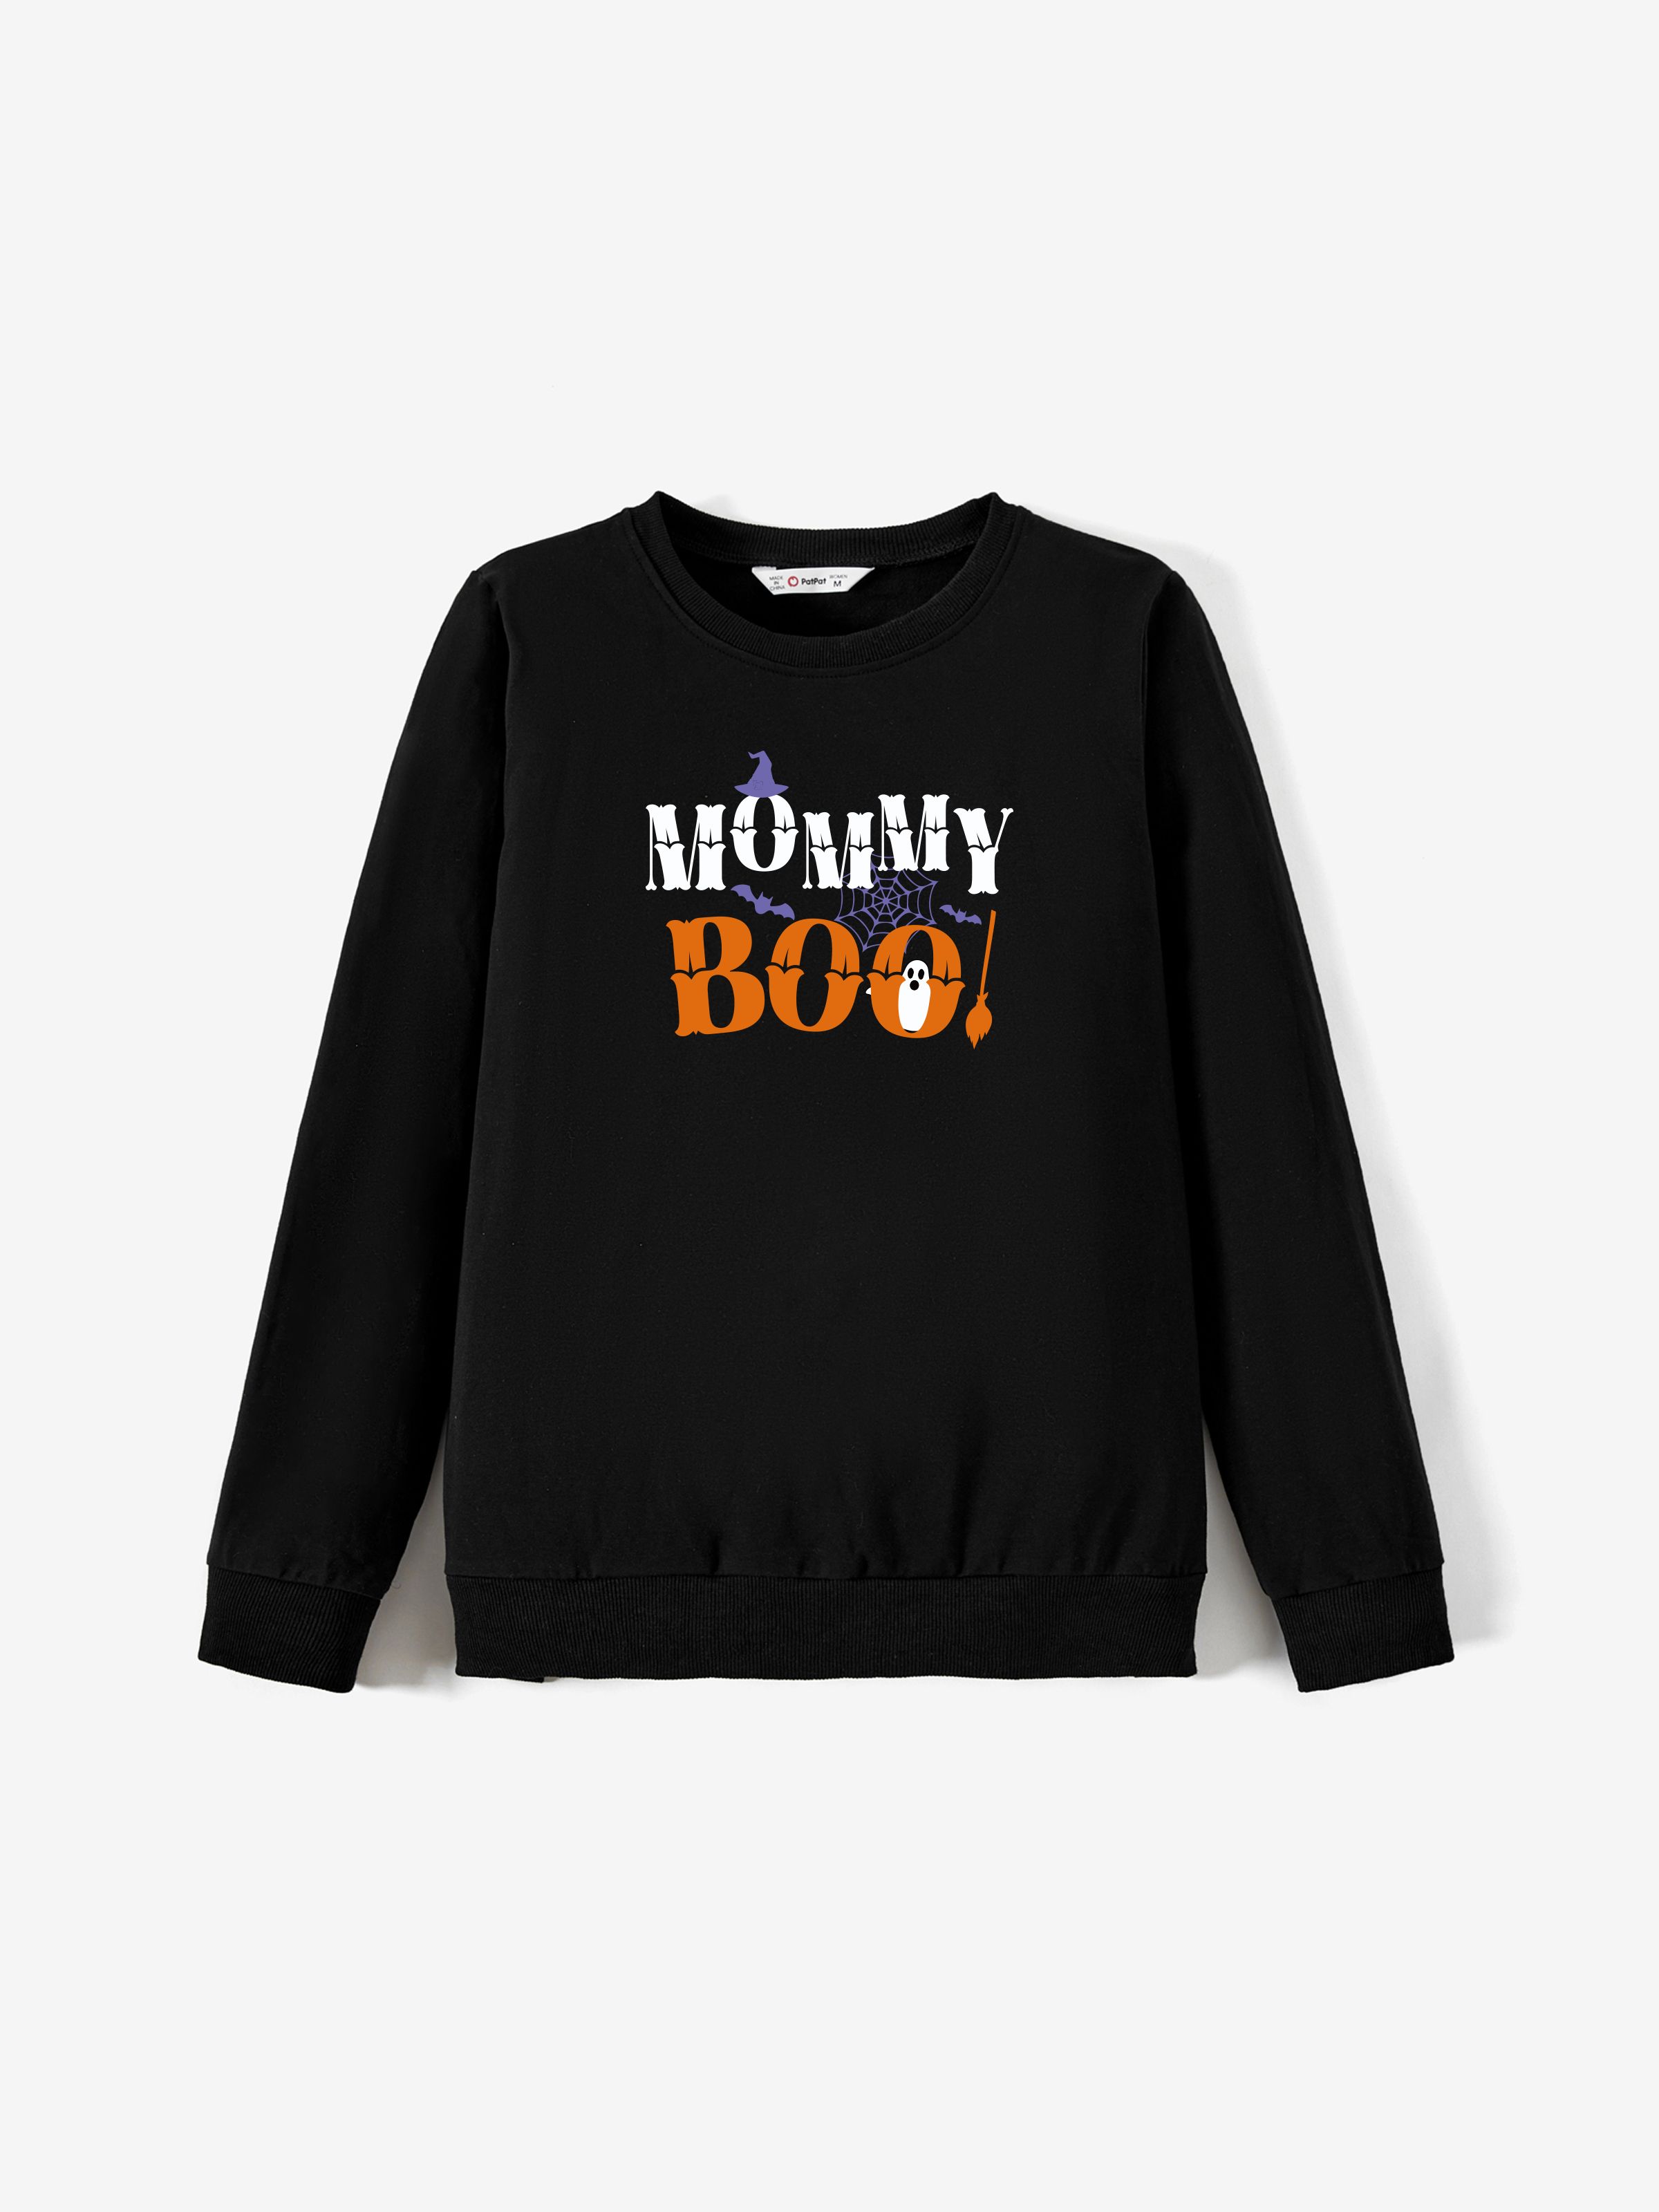 

Halloween Family Matching Cotton Black Spooky Elements Funny Text Tops